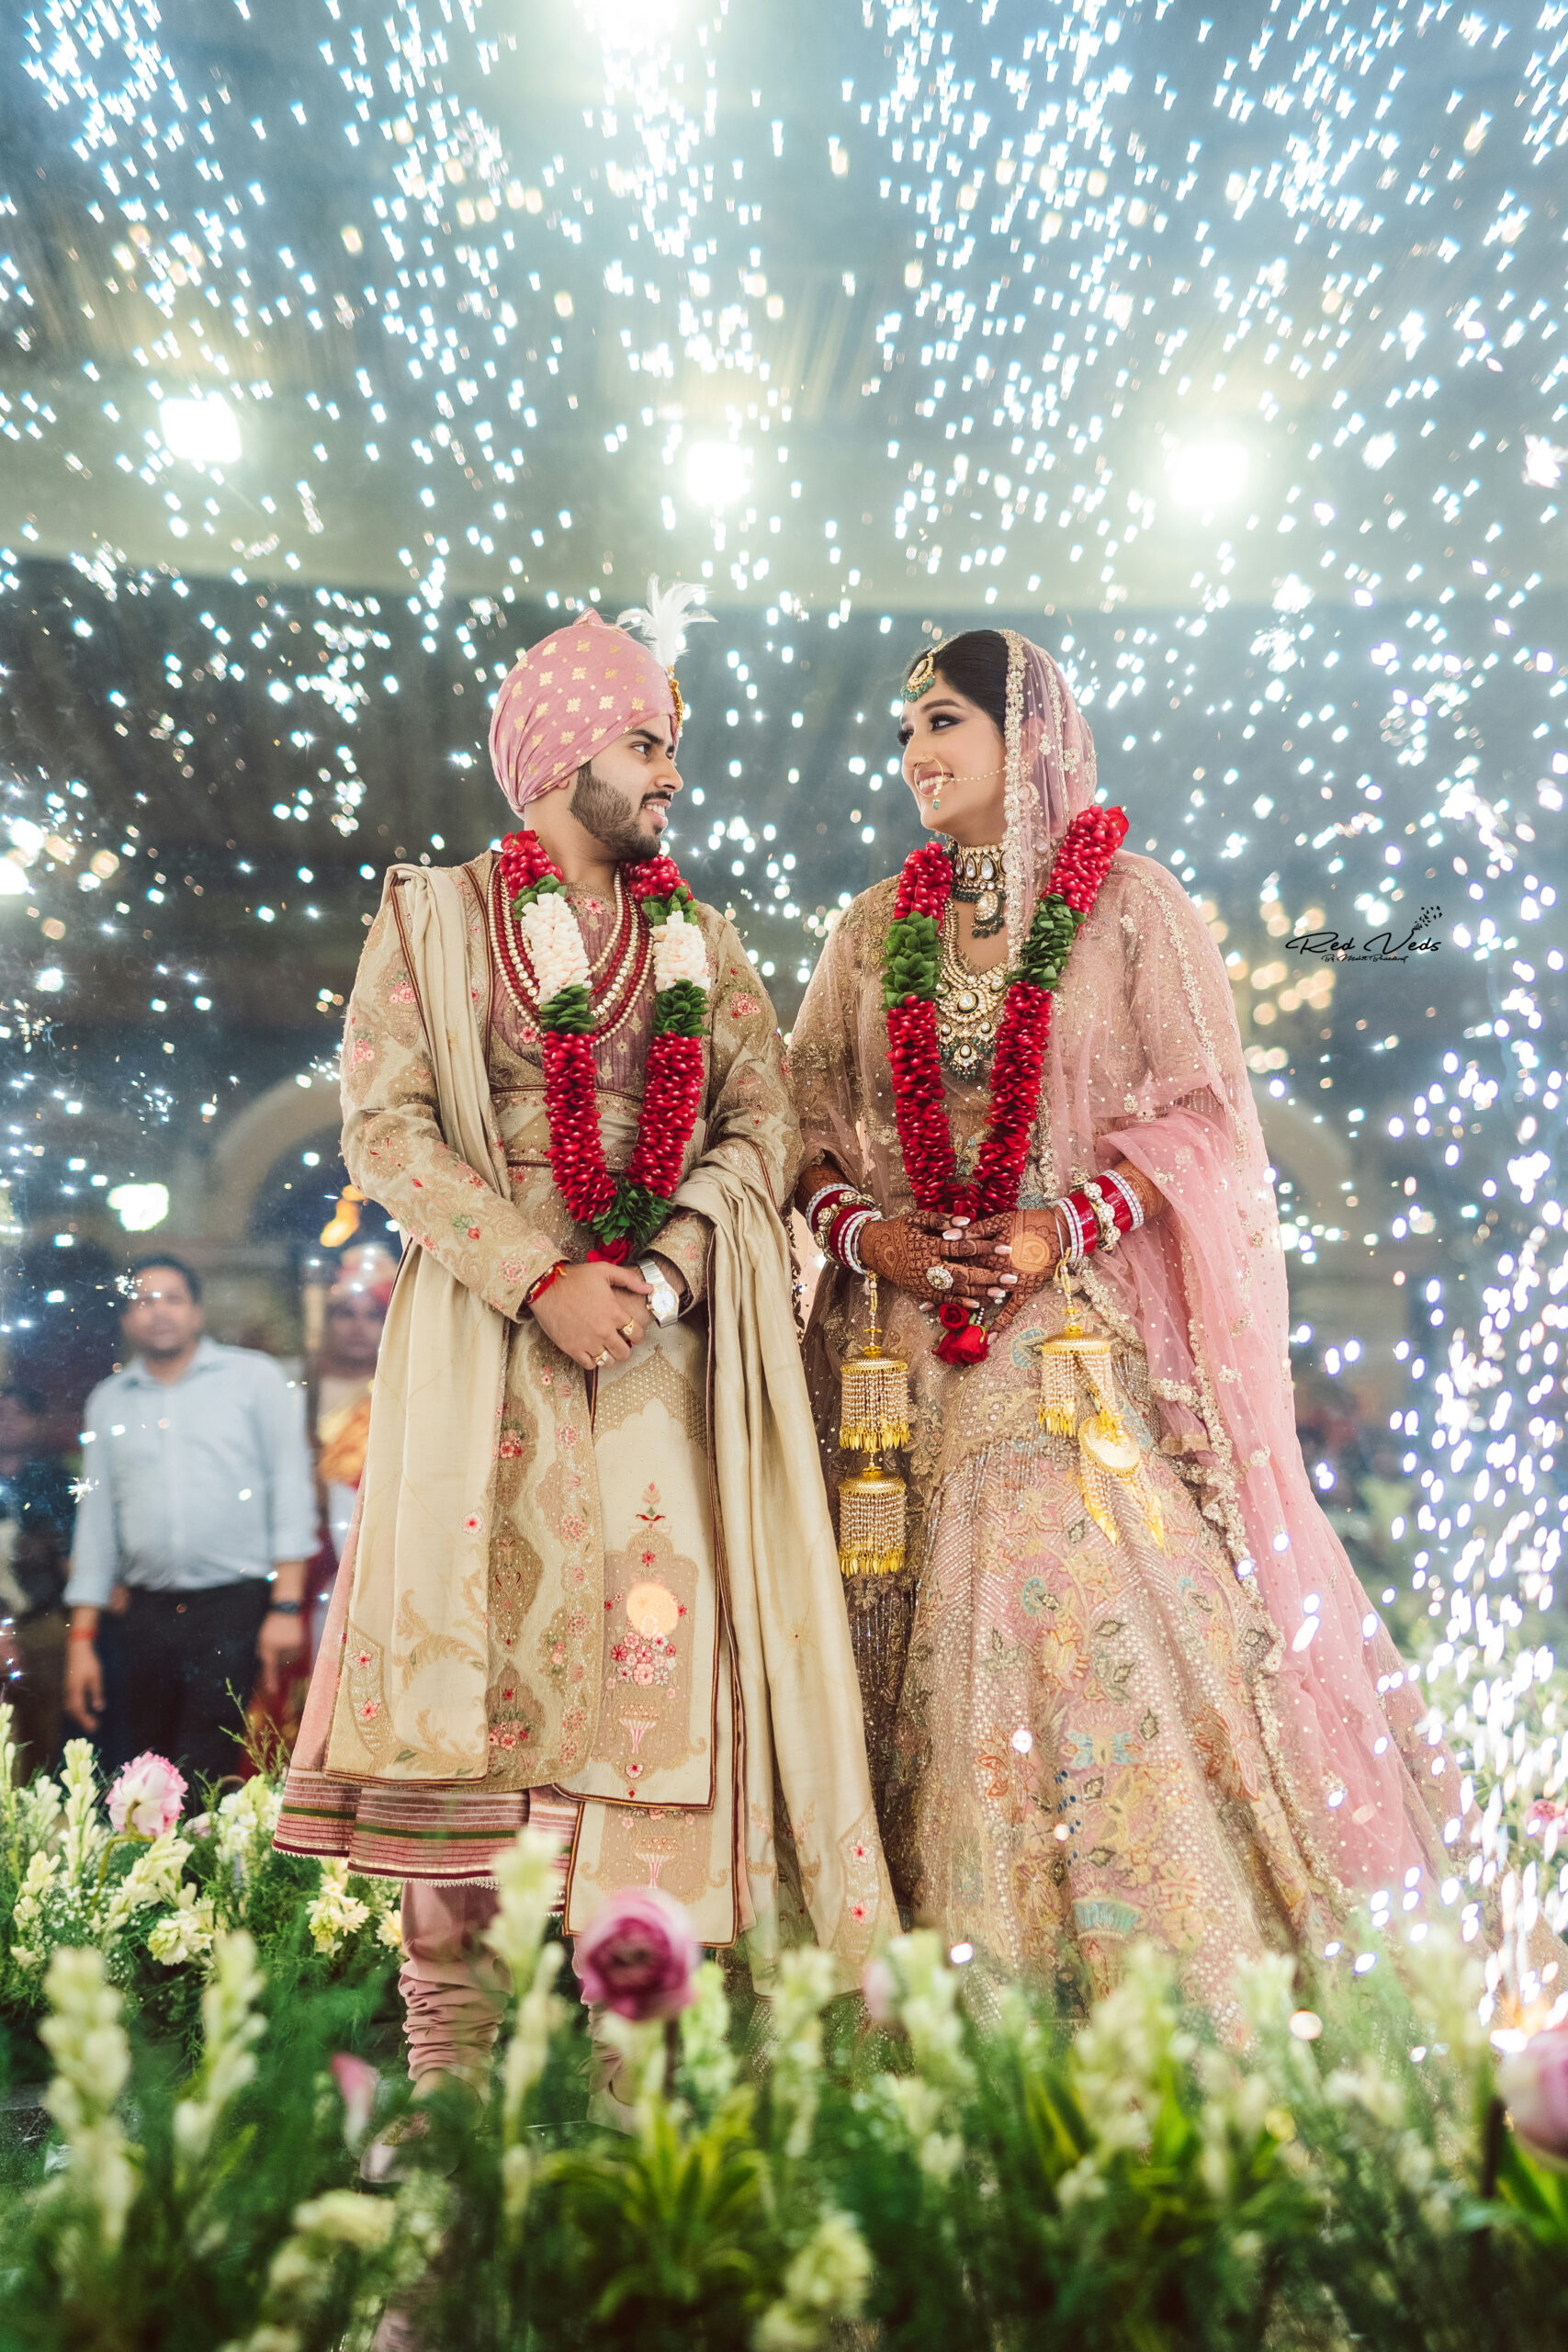 Wedding Photography Services at Rs 60000/day in Jaipur